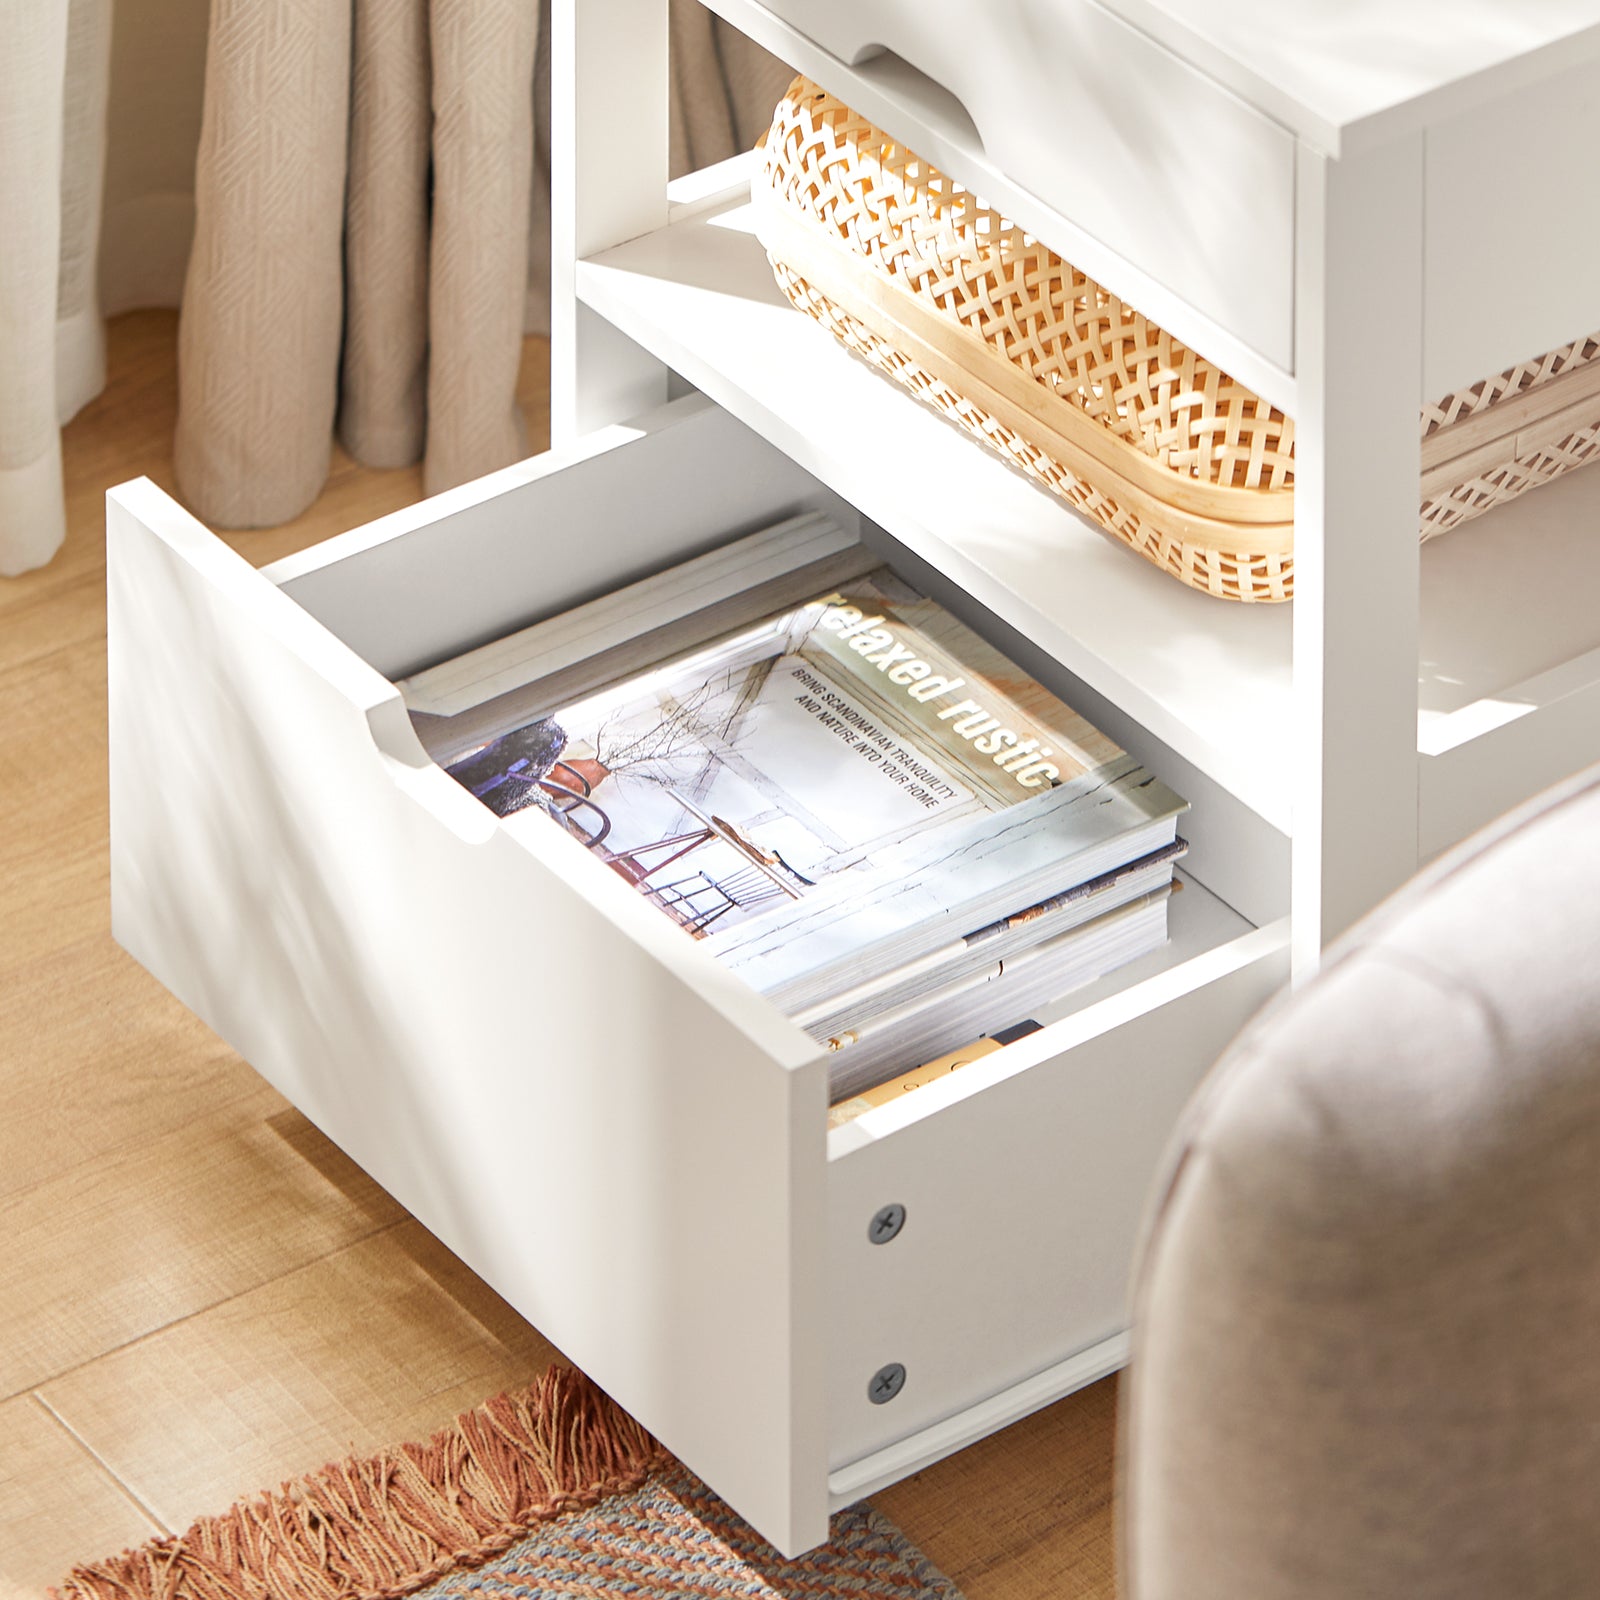 SoBuy Home Wood Beside End Table with 2 Drawers,White,FRG258-W